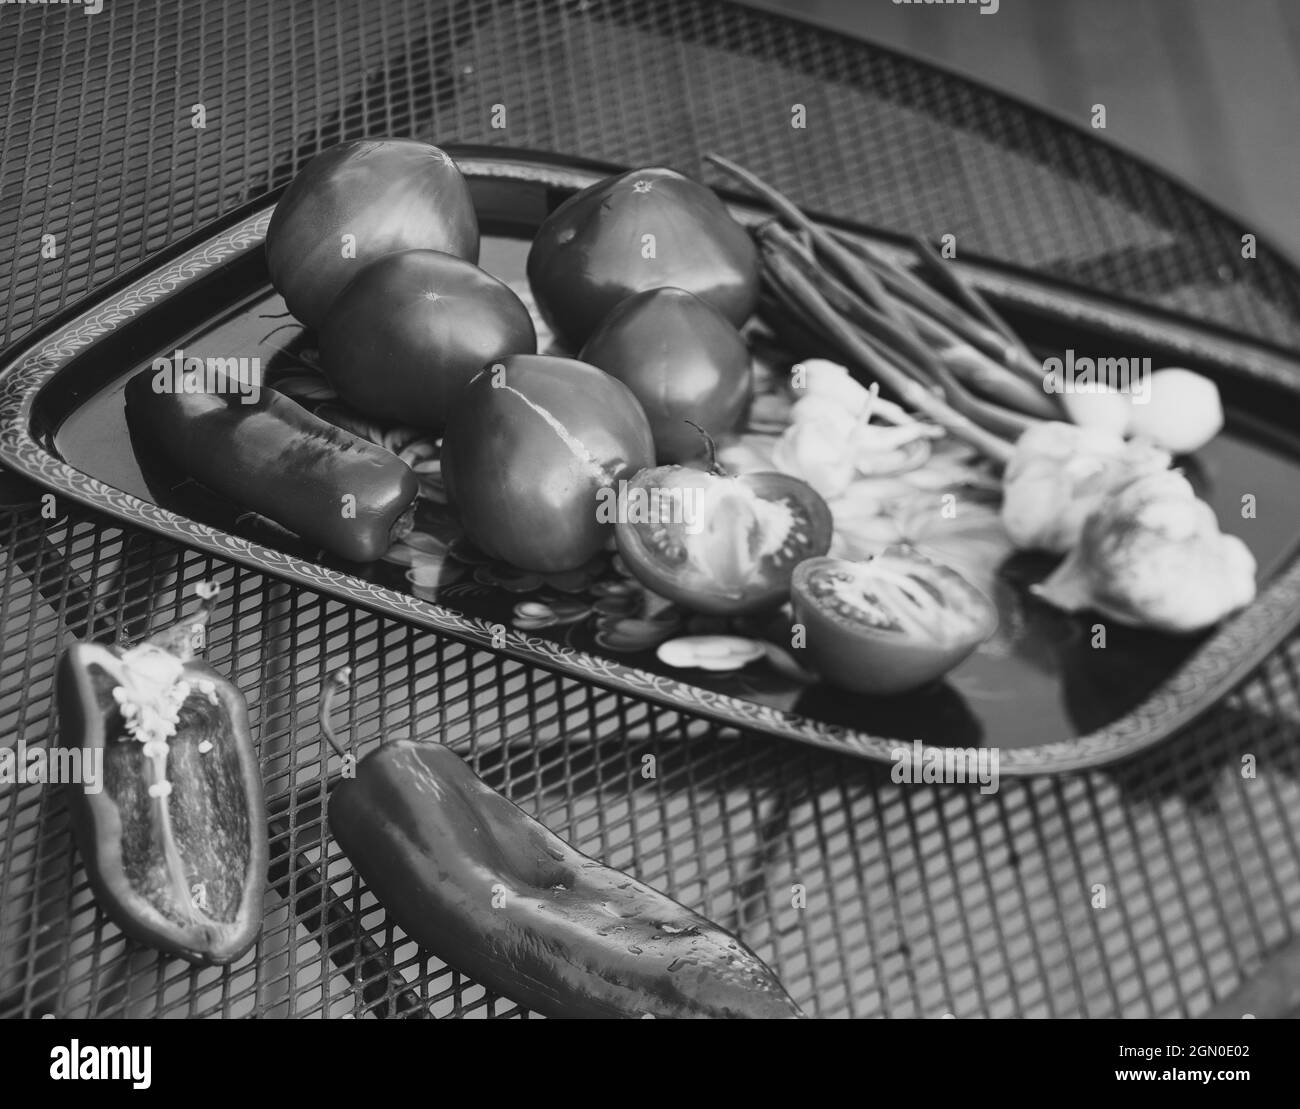 Tomatoes, garlic, green onions on tray. Sliced hot pepper. BCLose-up. Black and white. Stock Photo